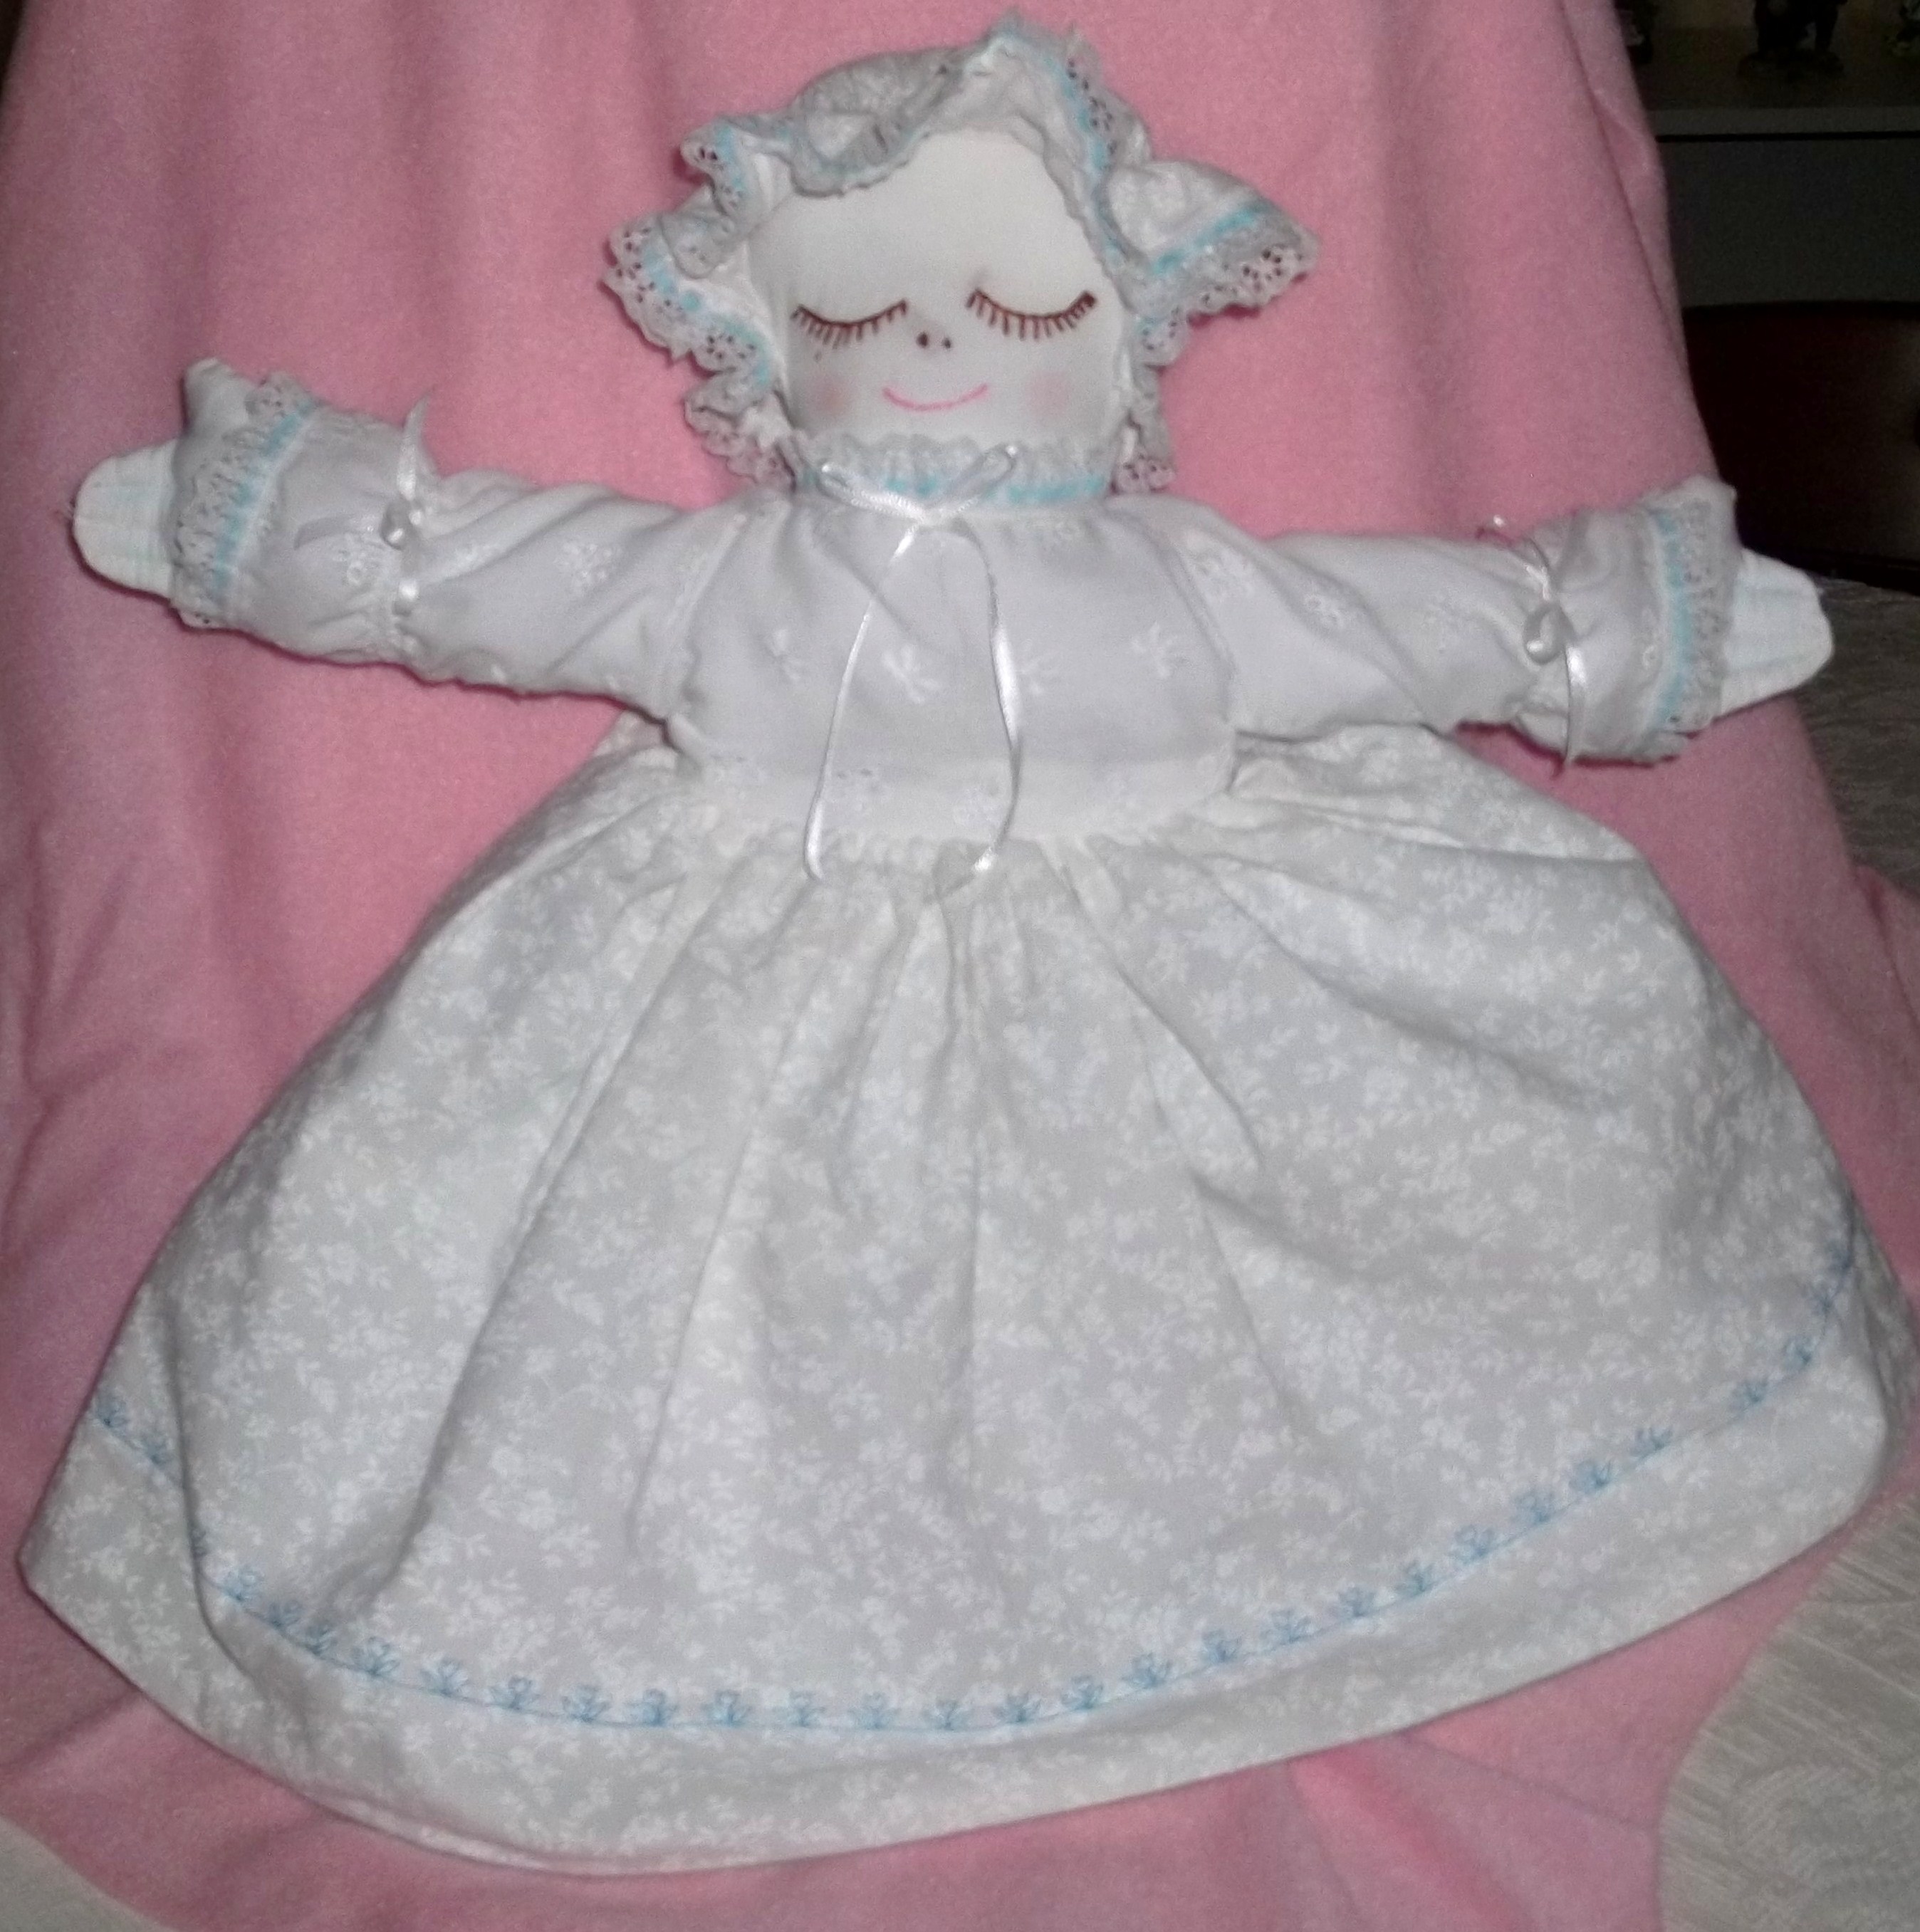 made with the free topsy turvy doll pattern by Sandy Huntress @ KeepsakeCrafts.net